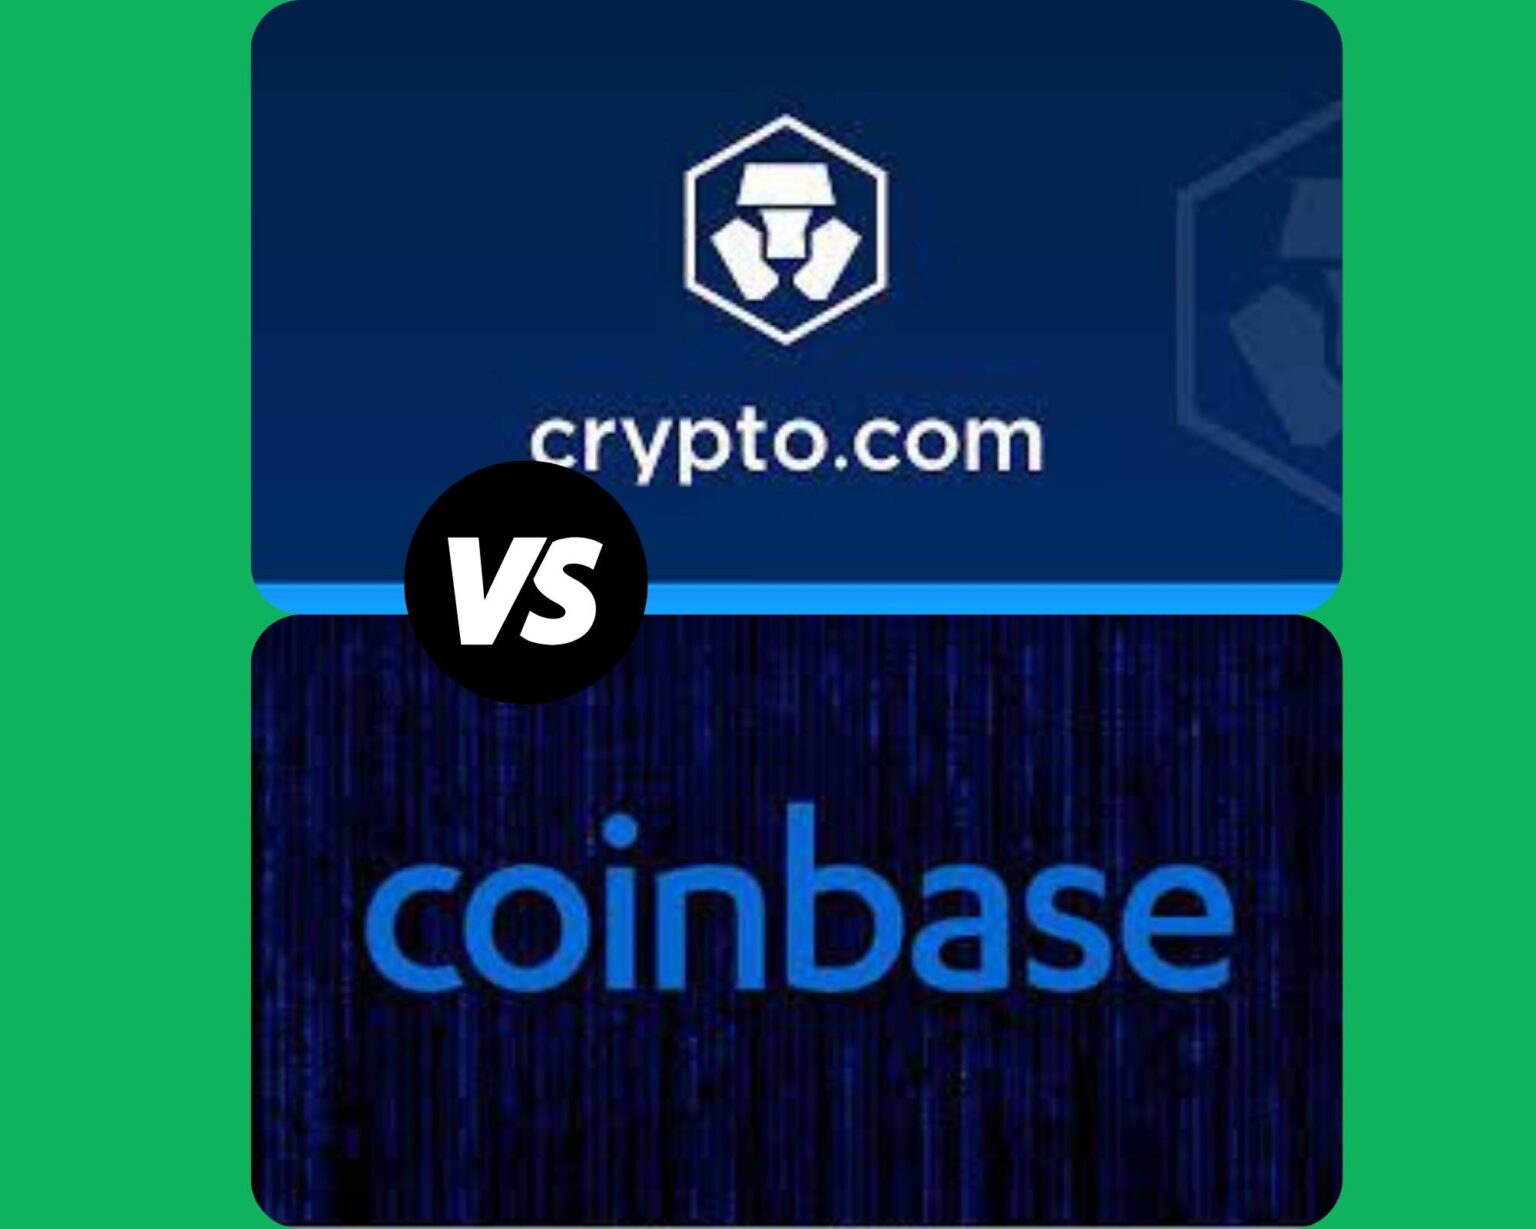 is crypto.com better than coinbase